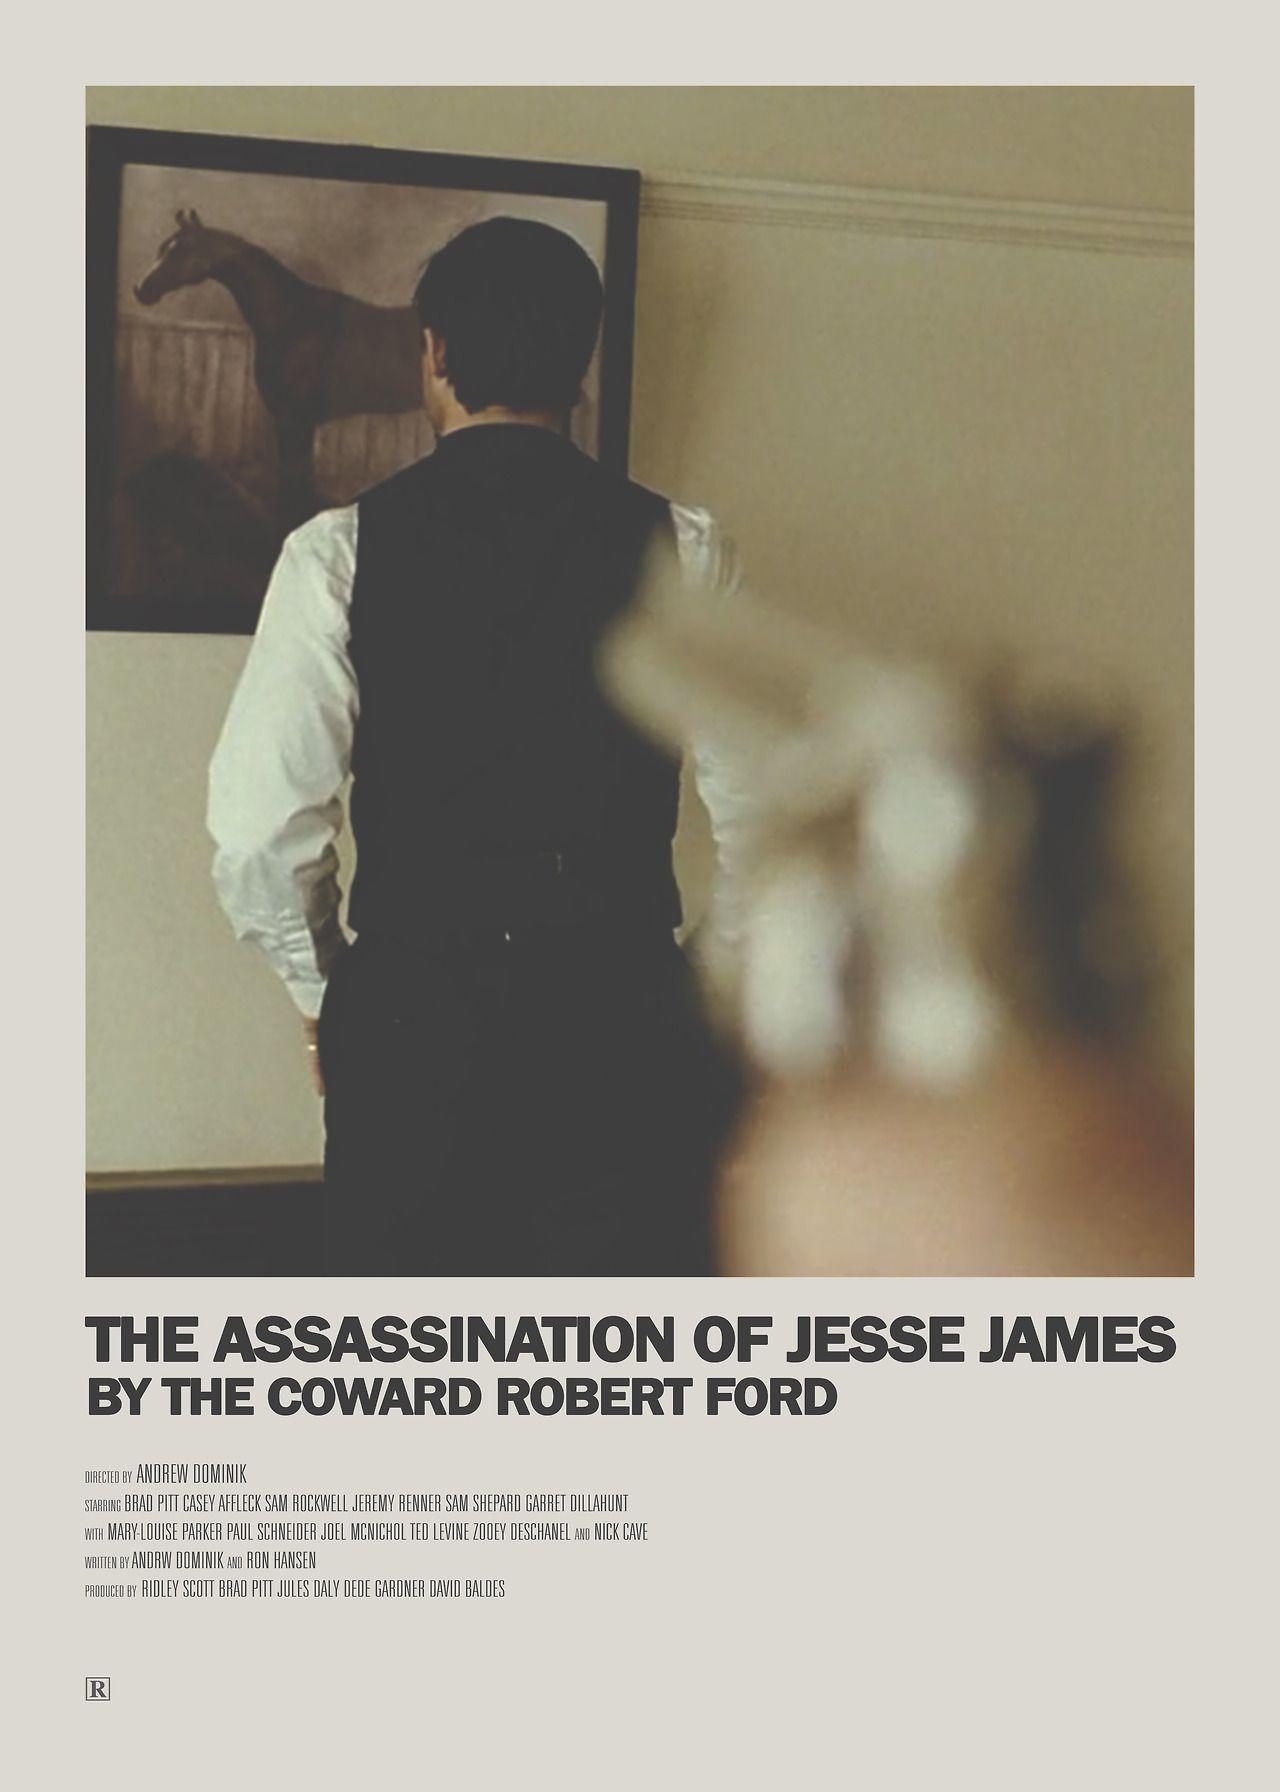 The Assassination of Jesse James by the Coward Robert Ford. minimal